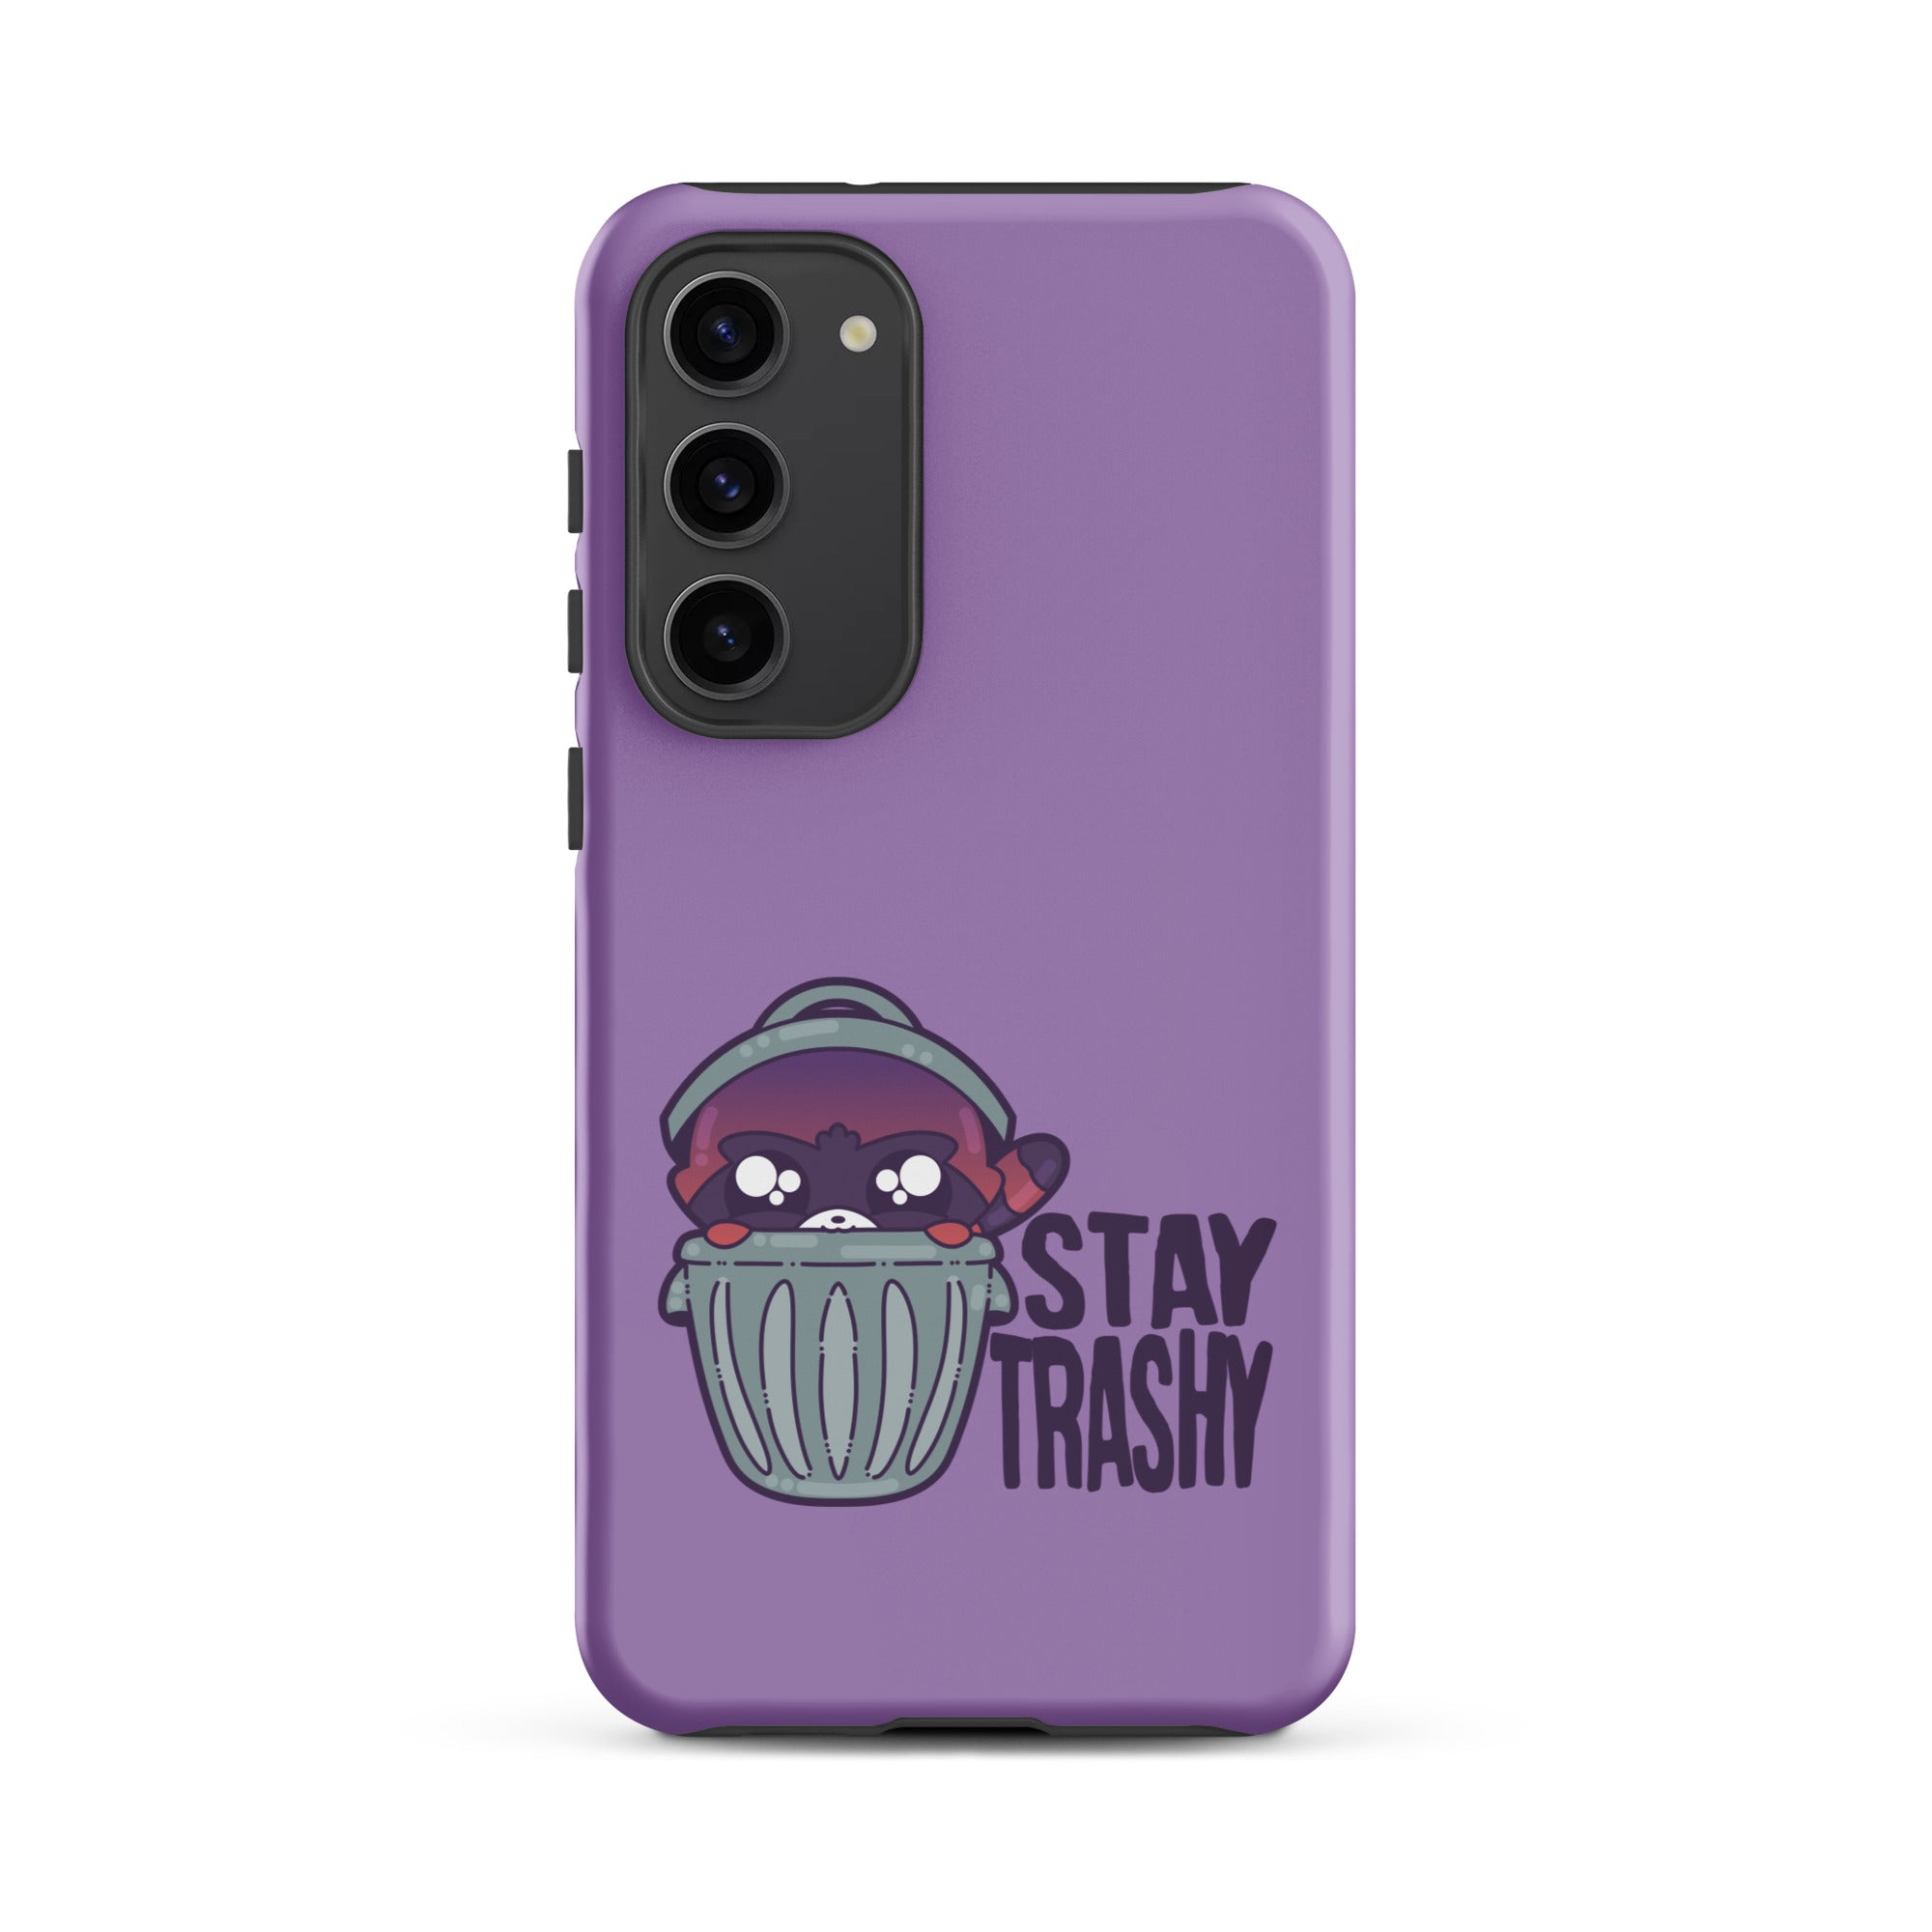 STAY TRASHY - Tough case for Samsung®